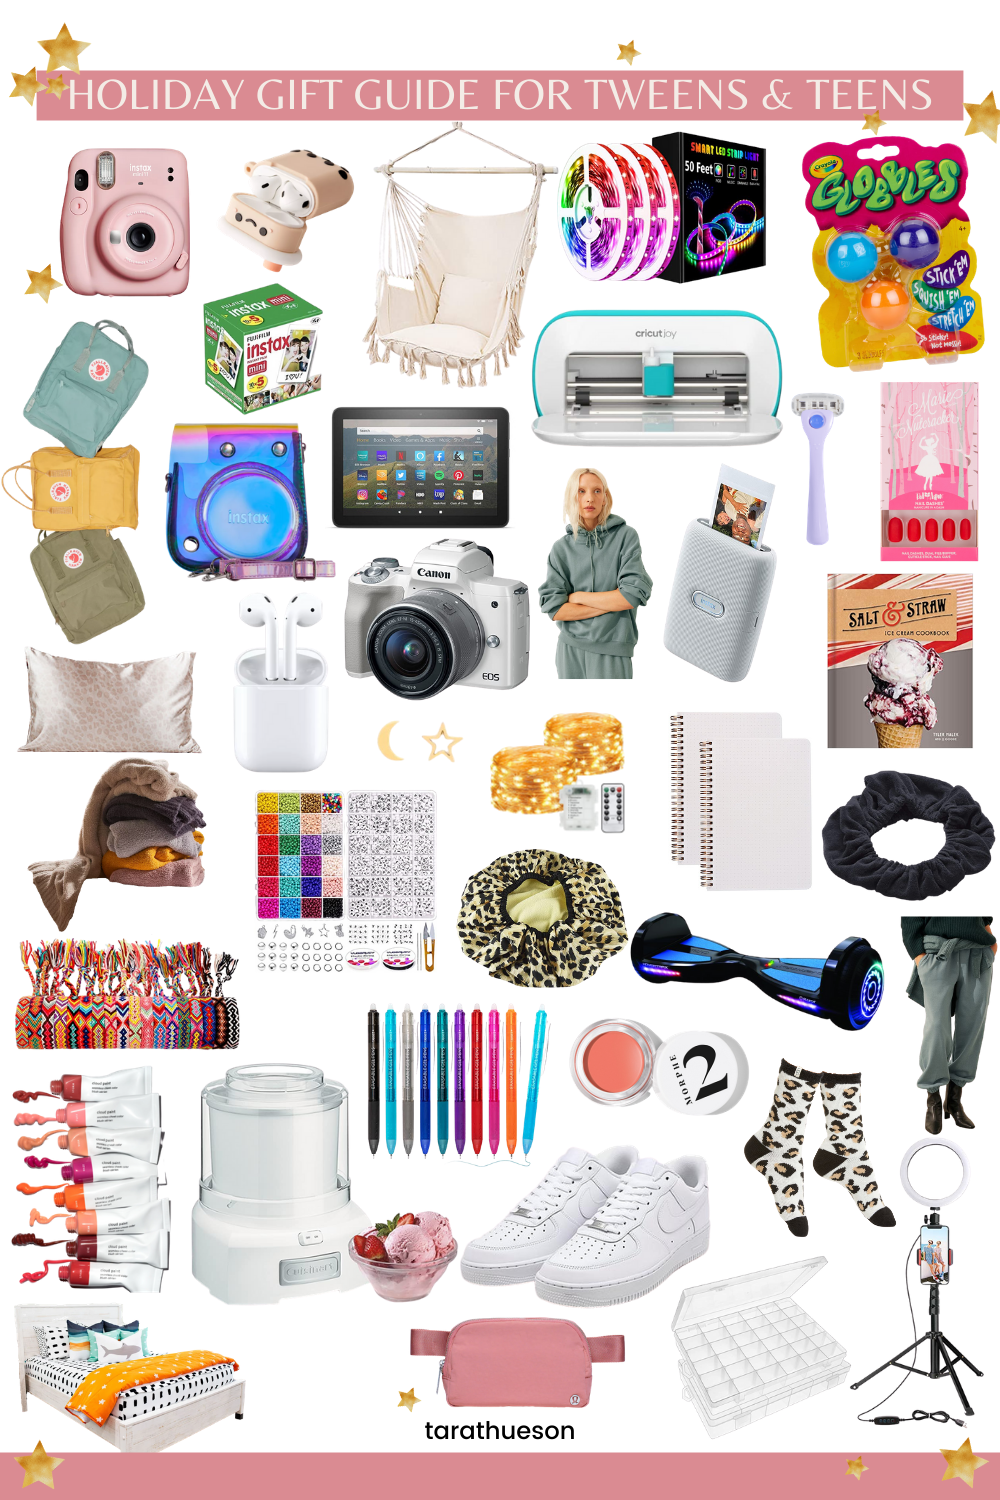 Teen and Tween Boy Gift Guide $20 or Less - Five Marigolds